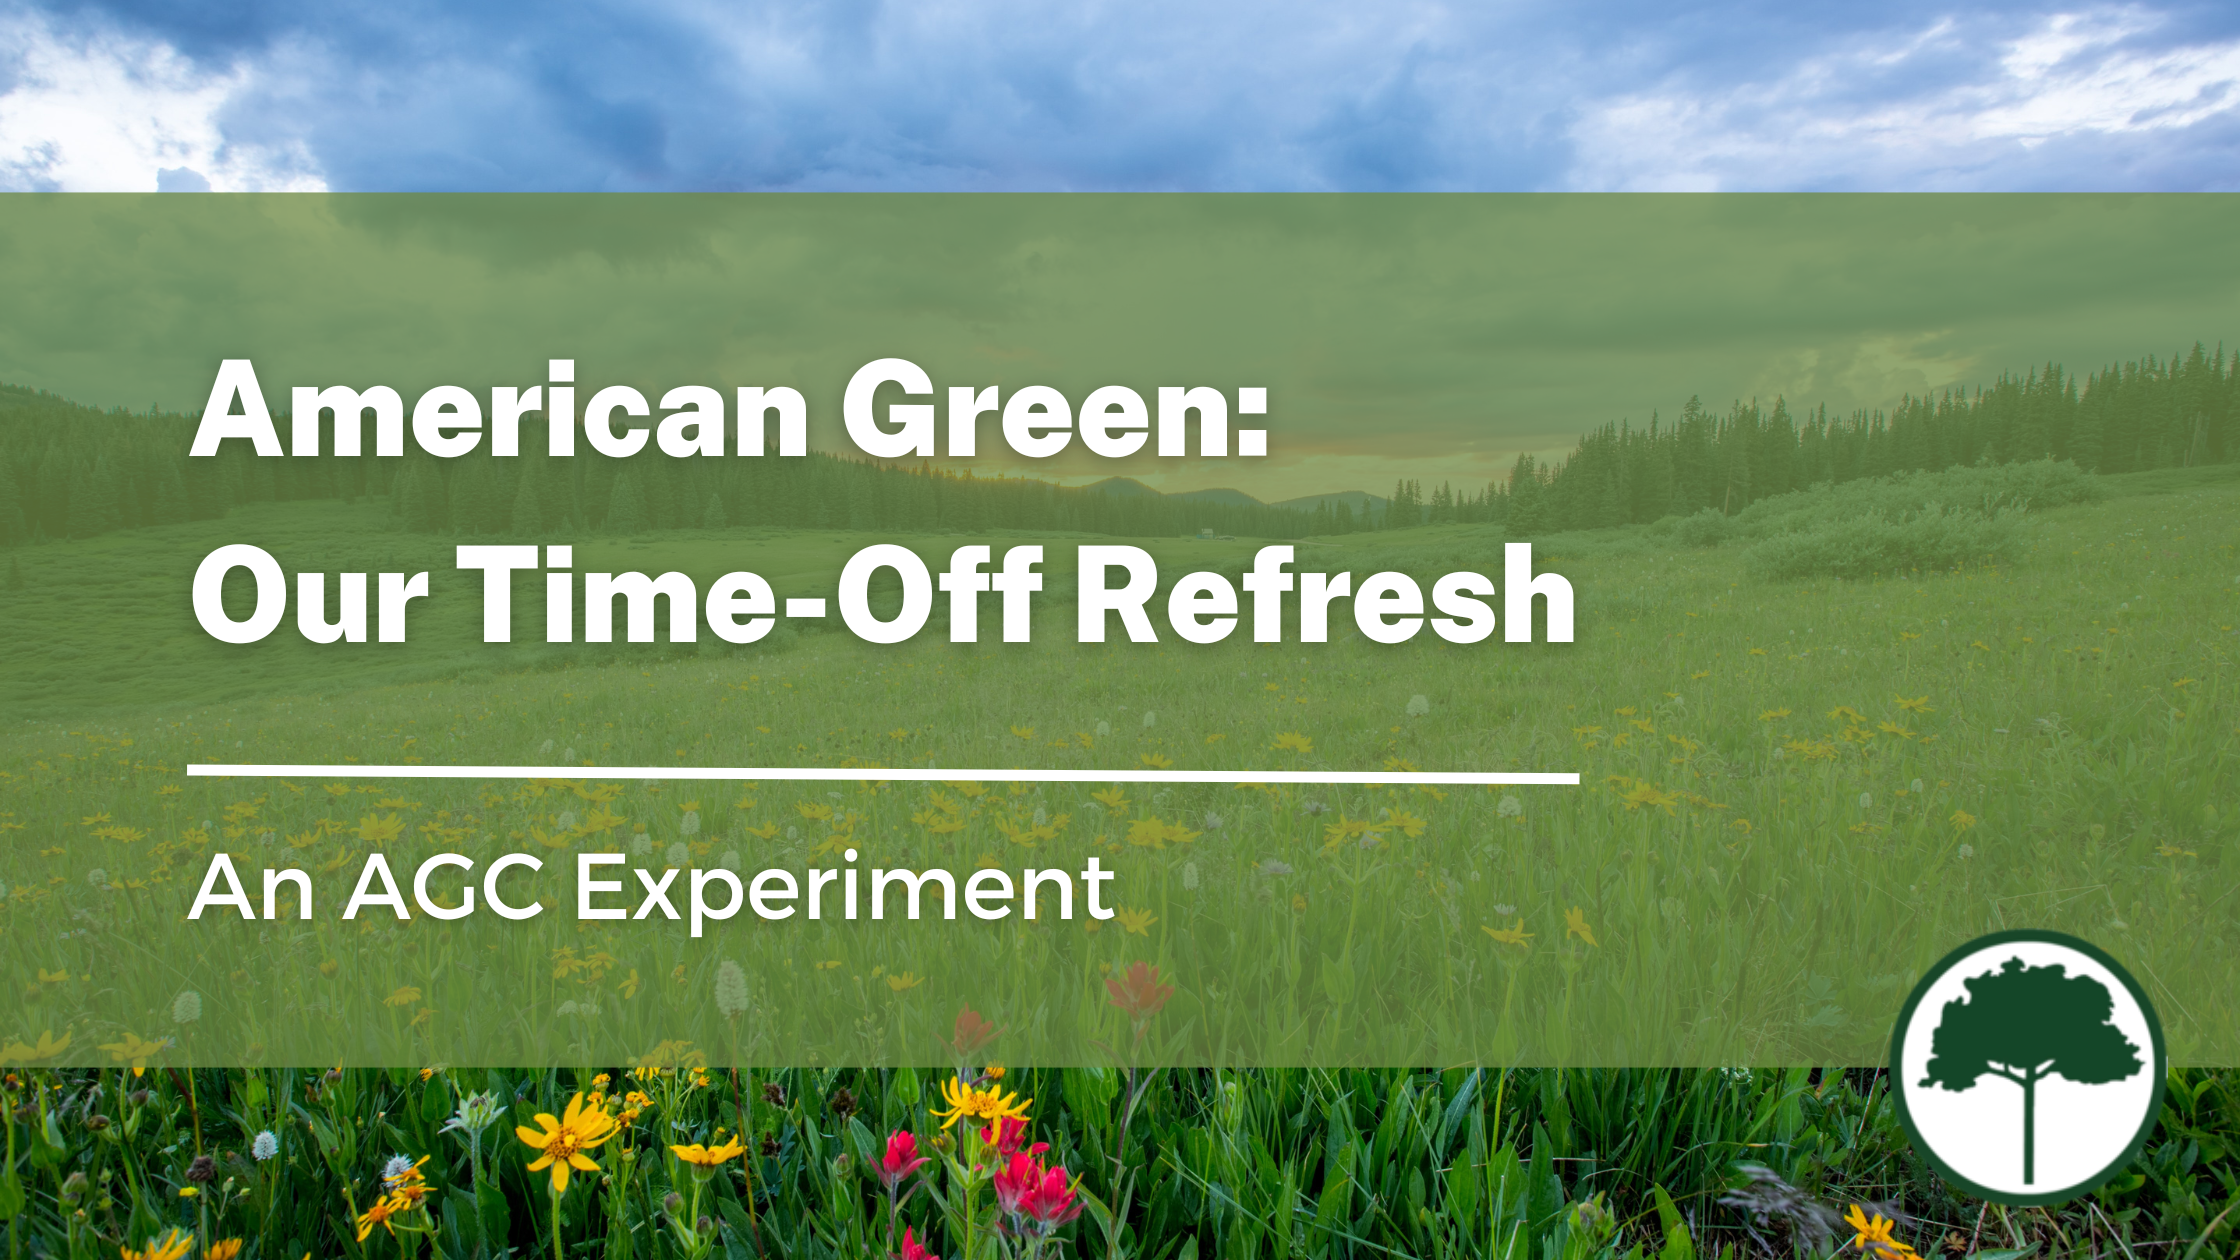 The background is a colorful spring scene in the mountains with yellow and red flowers in bloom. The text reads: "American Green: Our Time-Off Refresh"